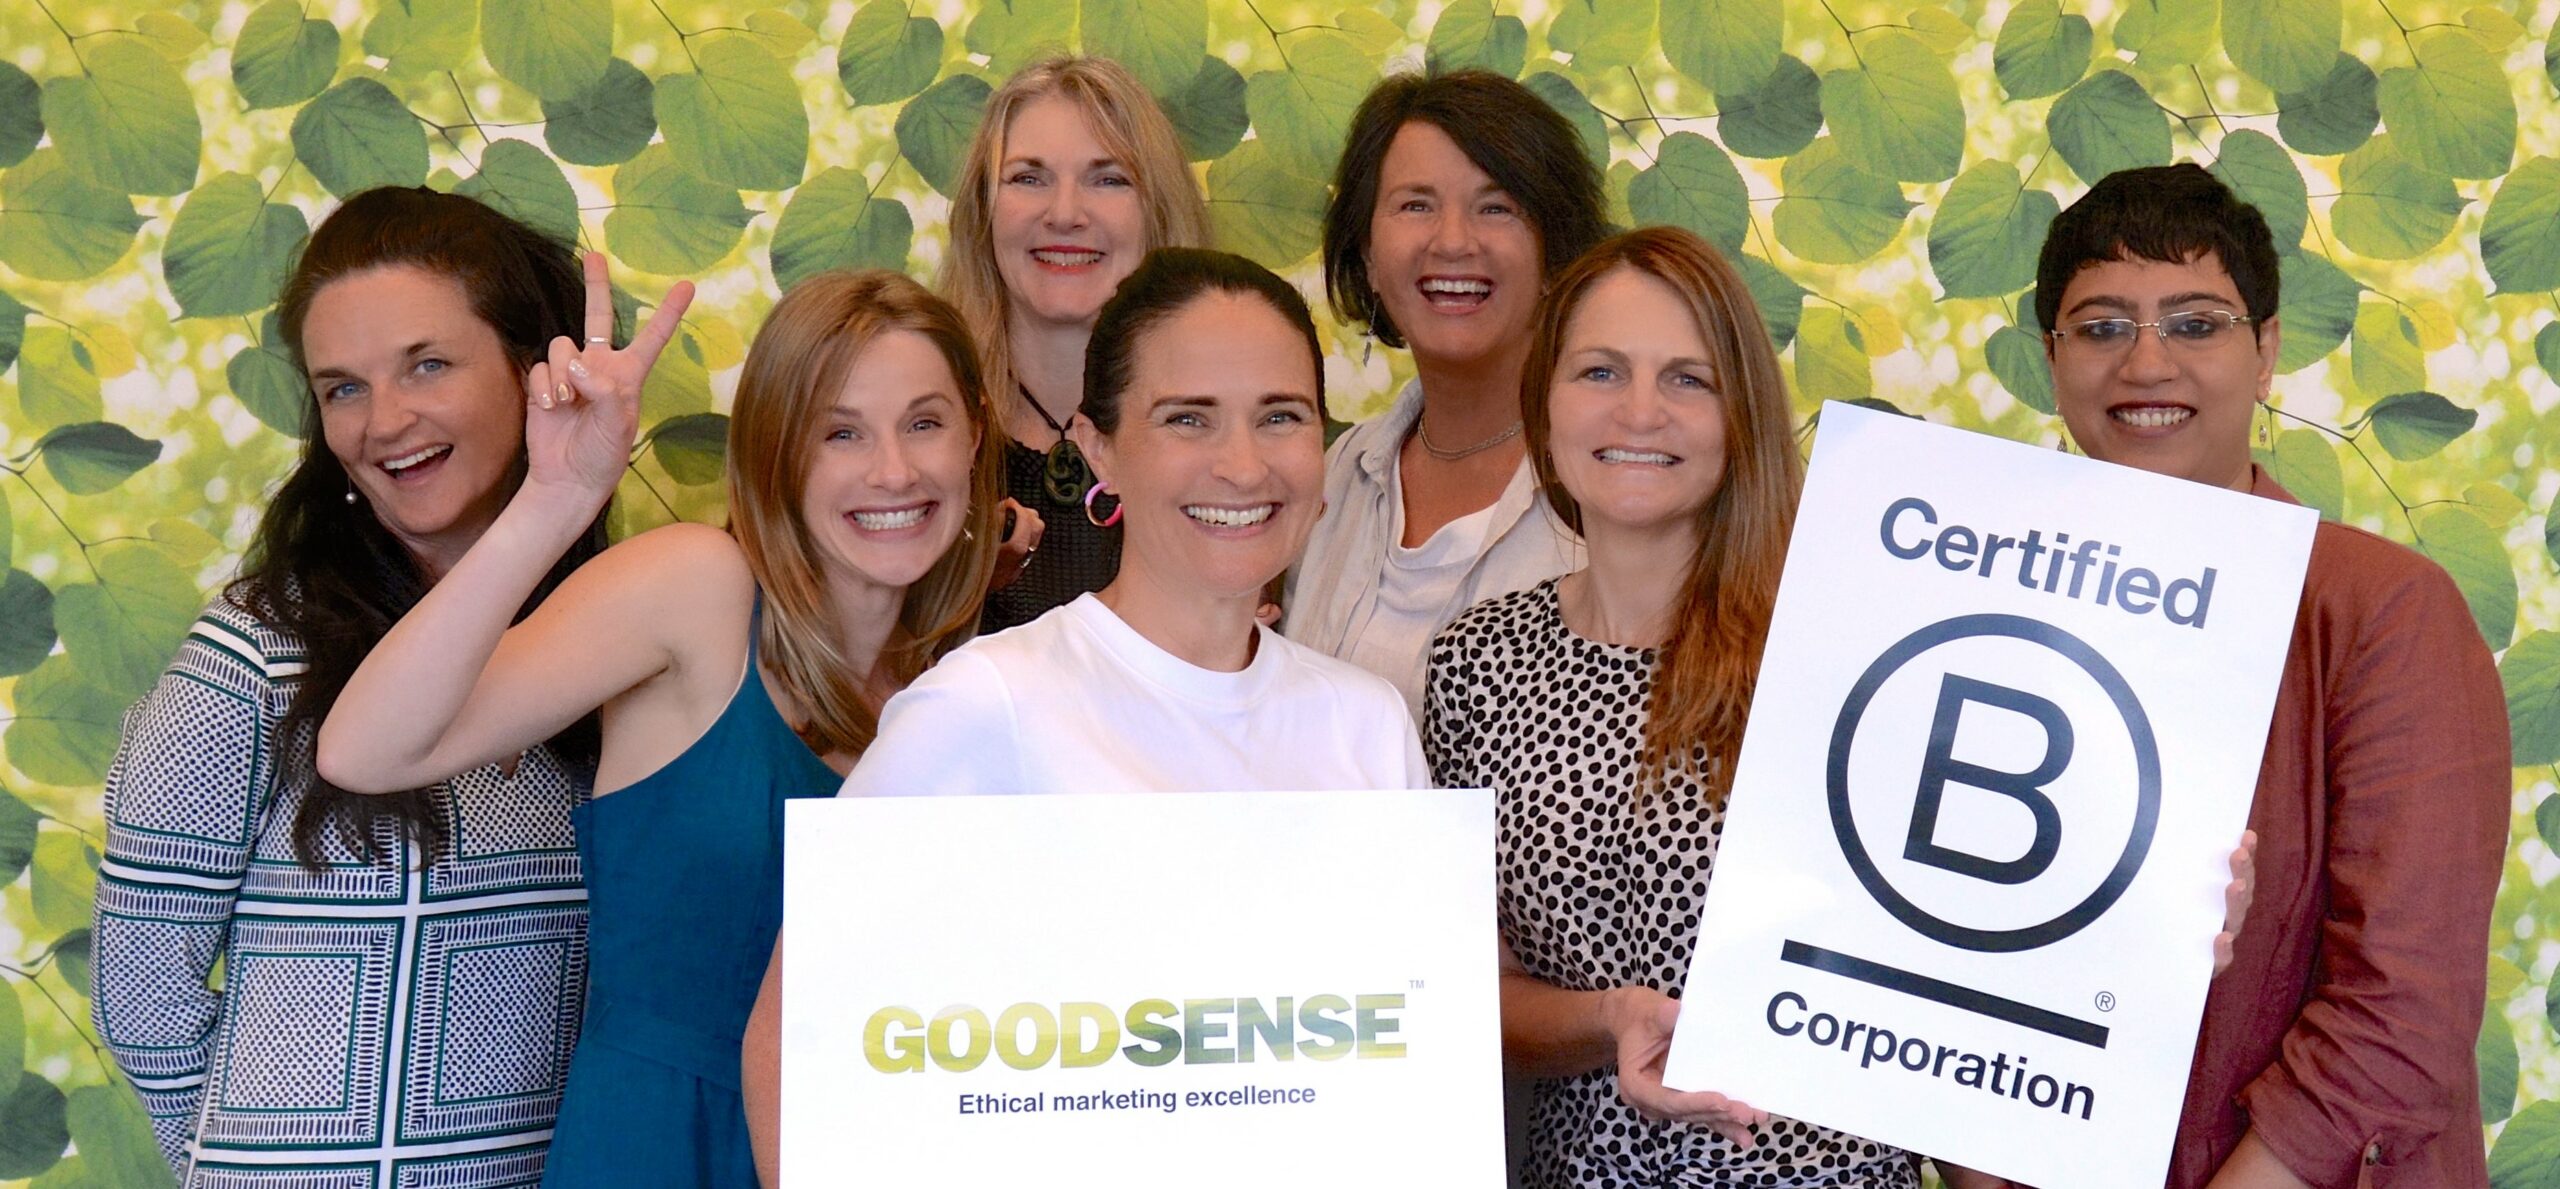 Sustainability marketing team GoodSense celebrate becoming BCorp - seven people stand infront of a leafy green background smiling and holding signs. The signs are a GoodSense logo and a Certified B Corporation logo. One person is making a peace sign.